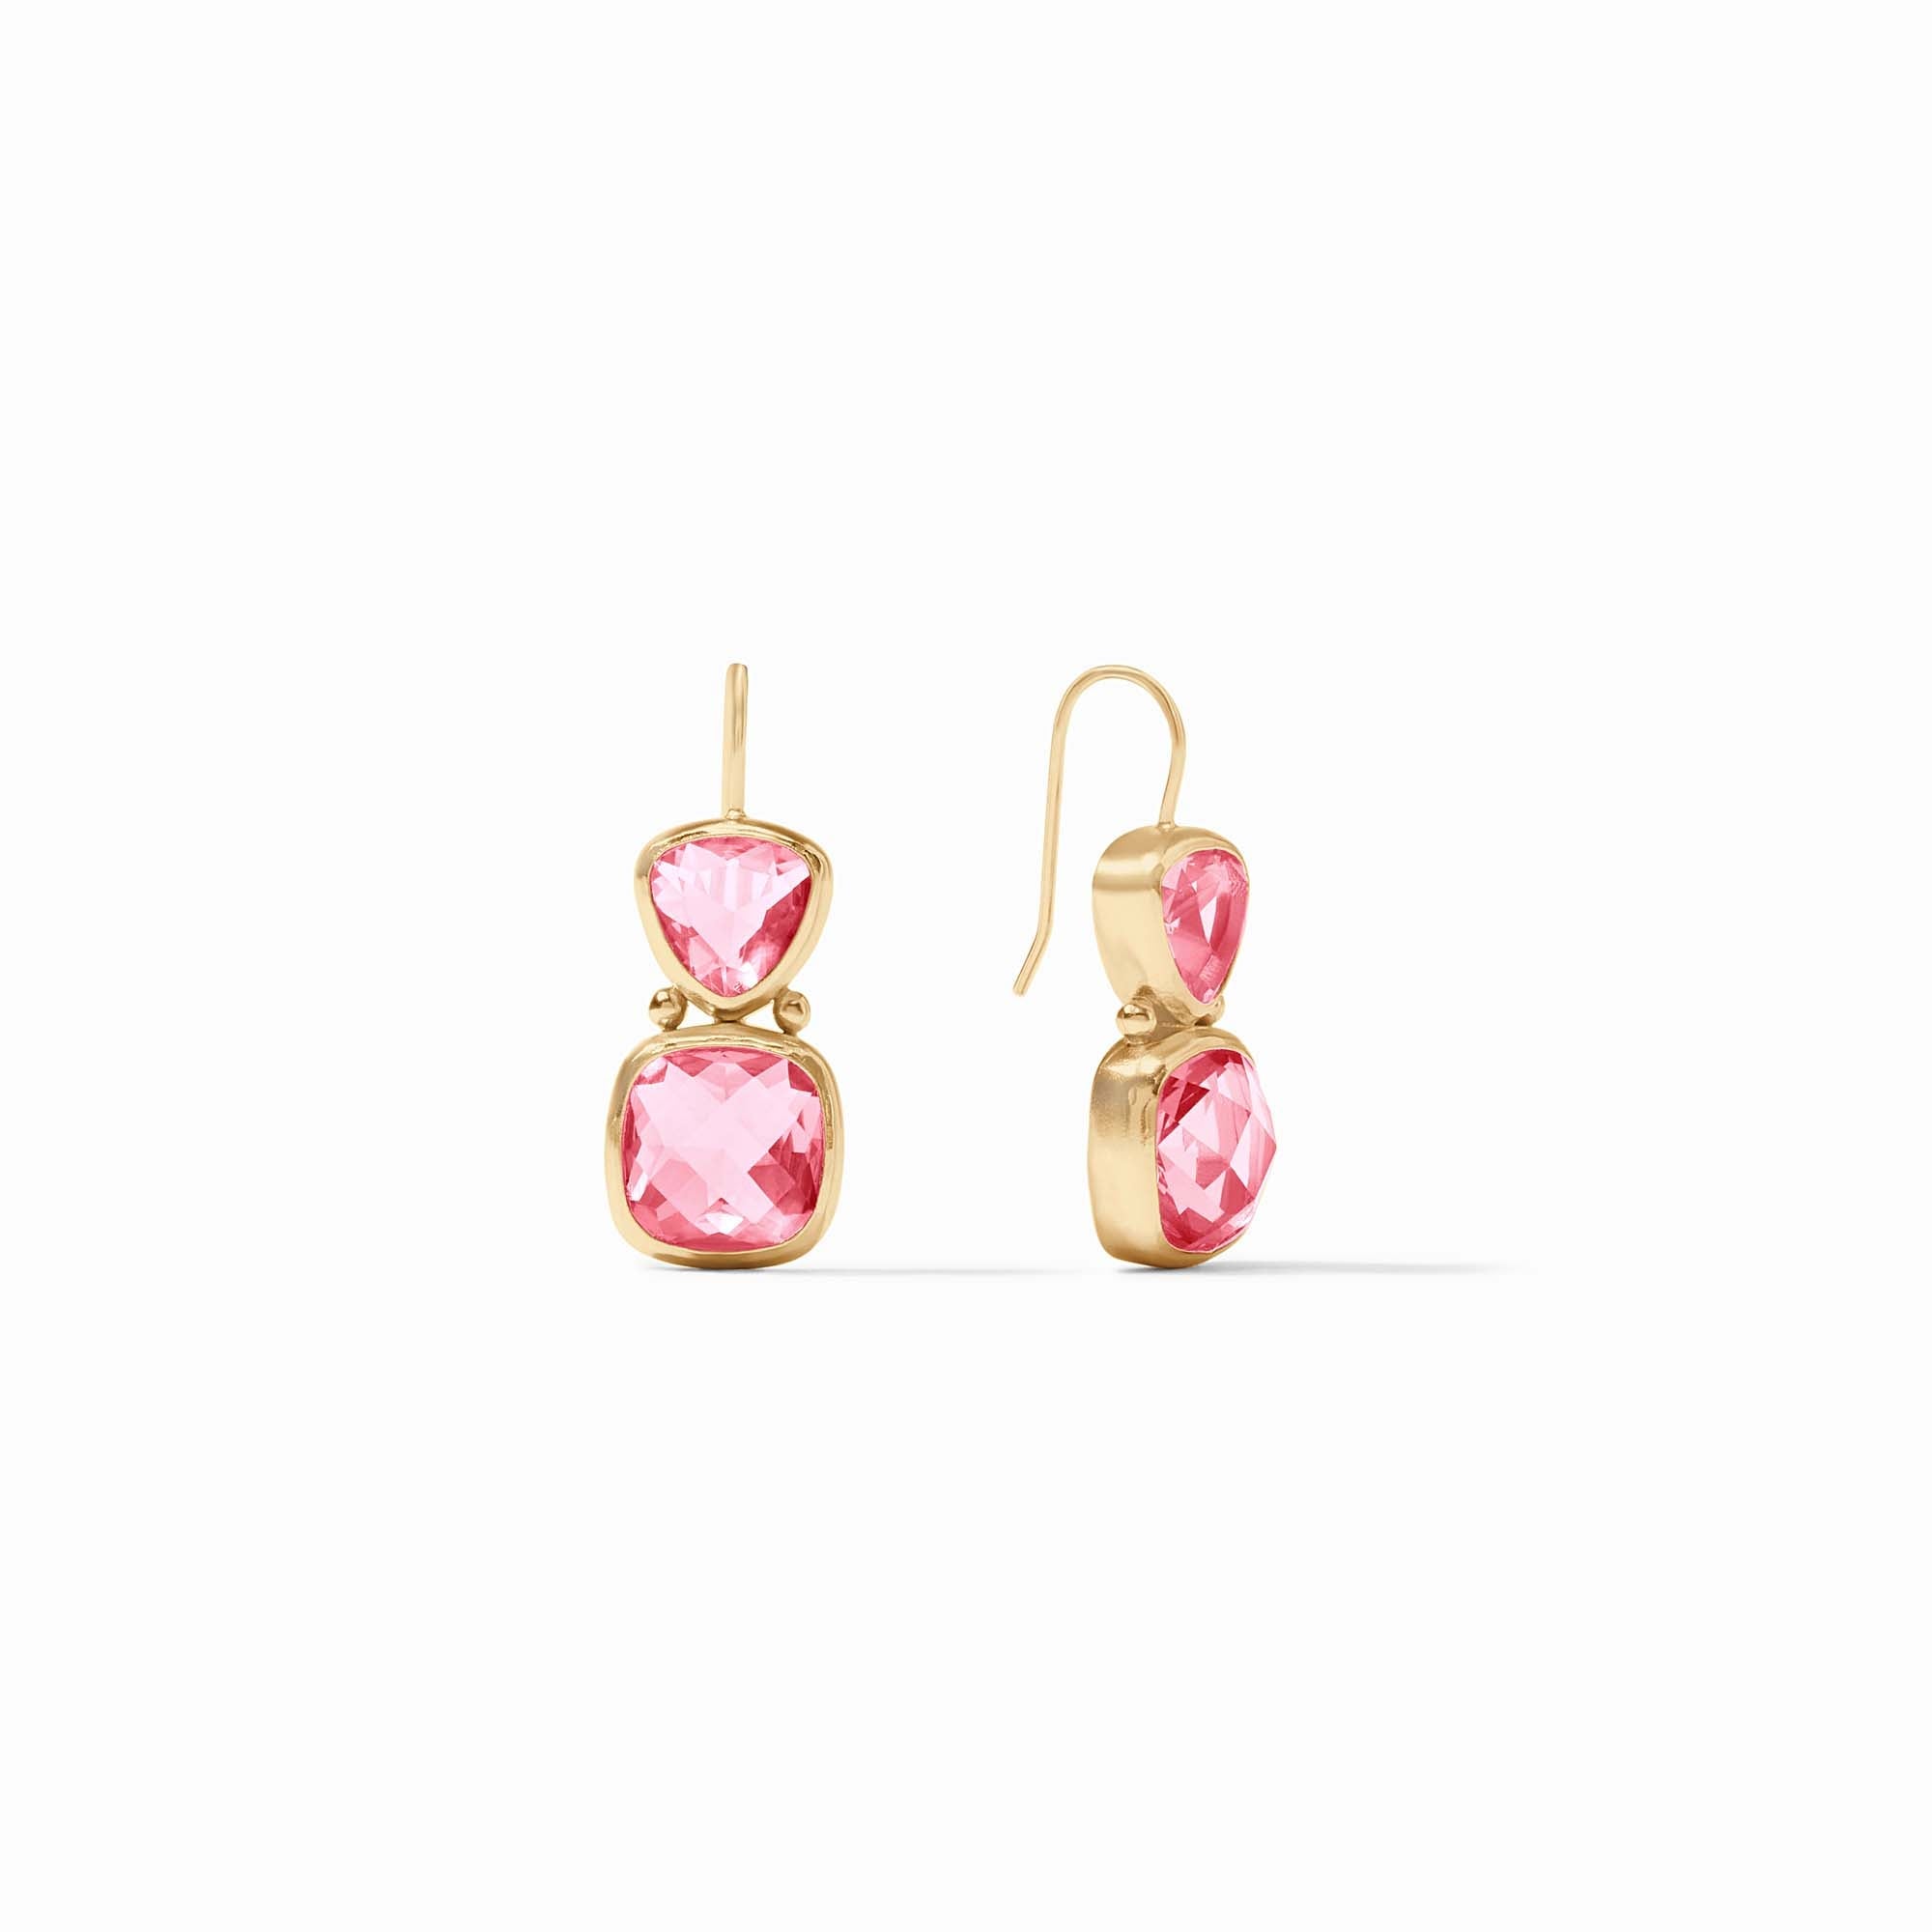 Julie Vos - Aquitaine Earring, Peony Pink